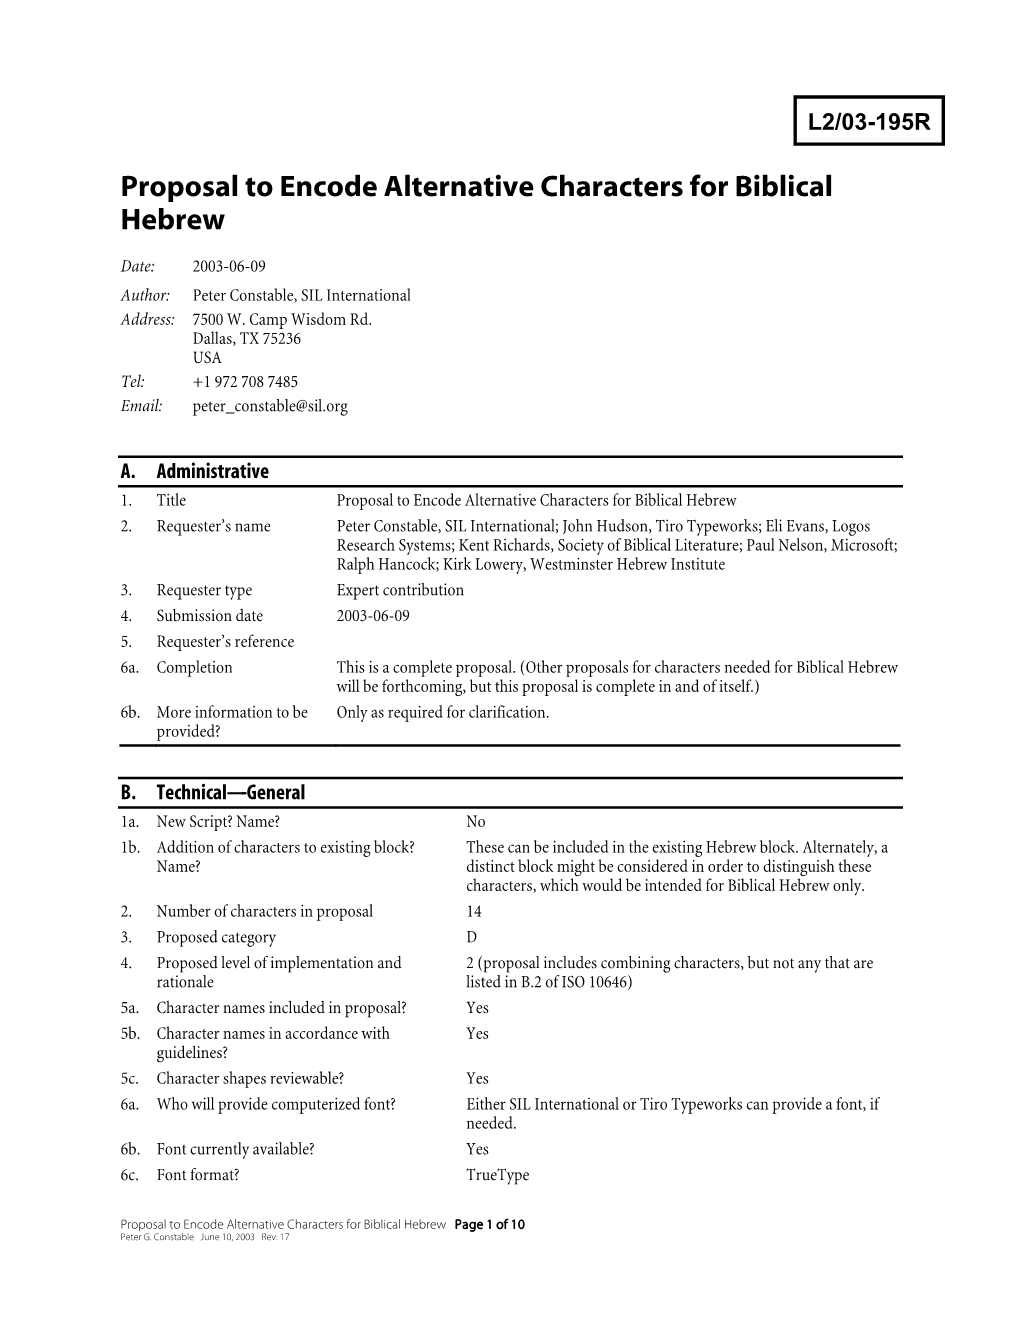 Proposal to Encode Alternative Characters for Biblical Hebrew